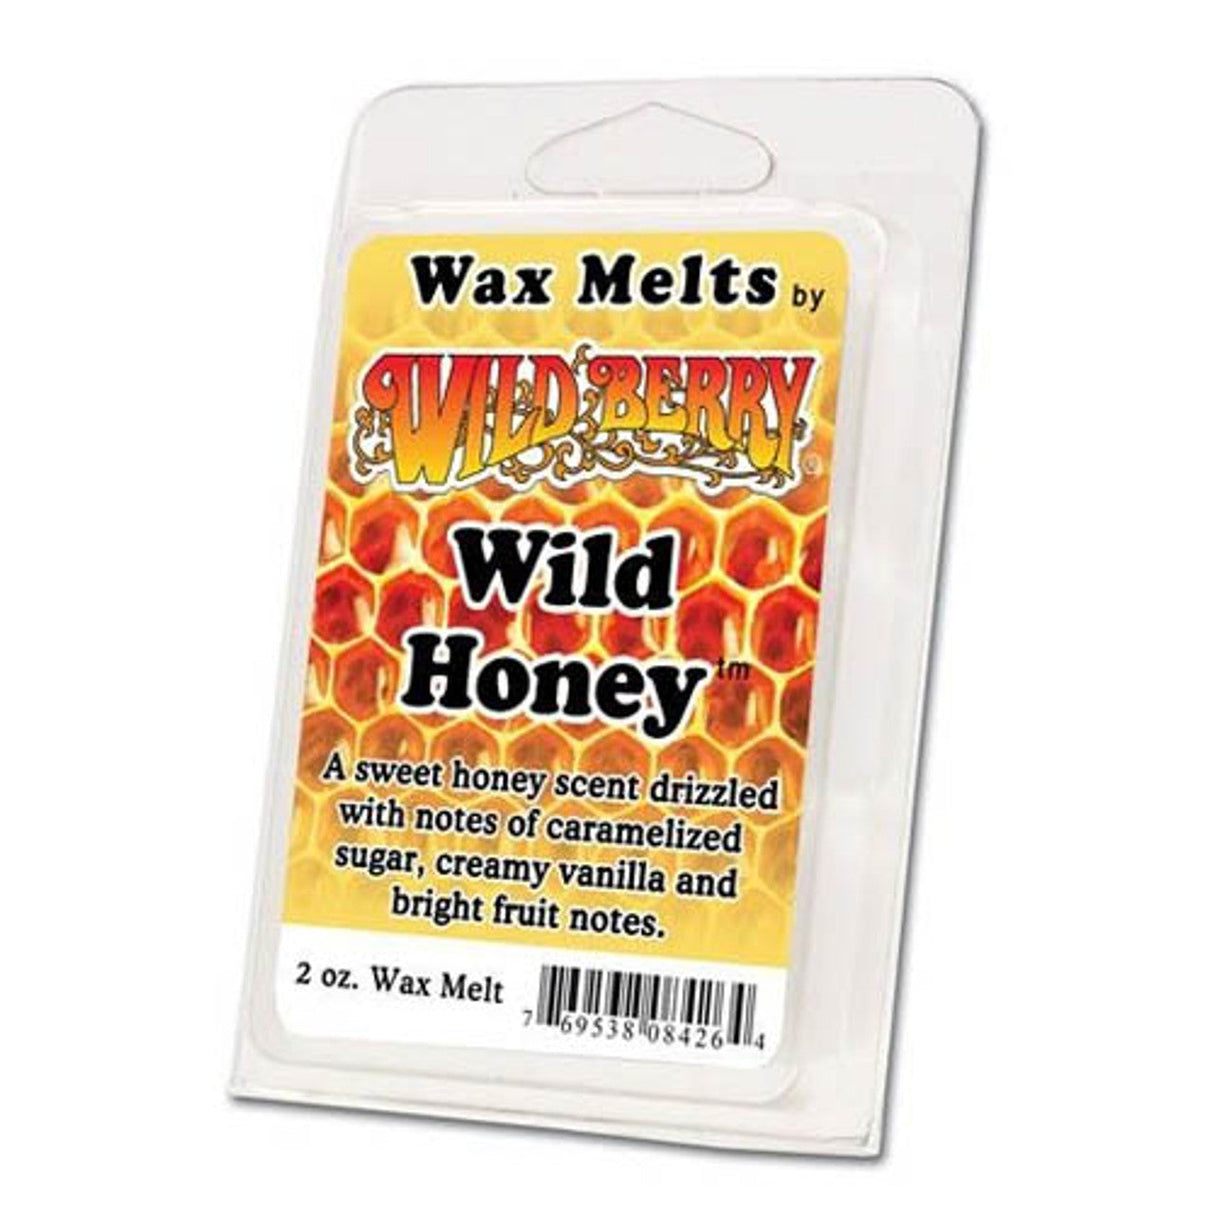 Wild Berry Wild Honey Wax Melts 2oz pack with vibrant packaging, front view